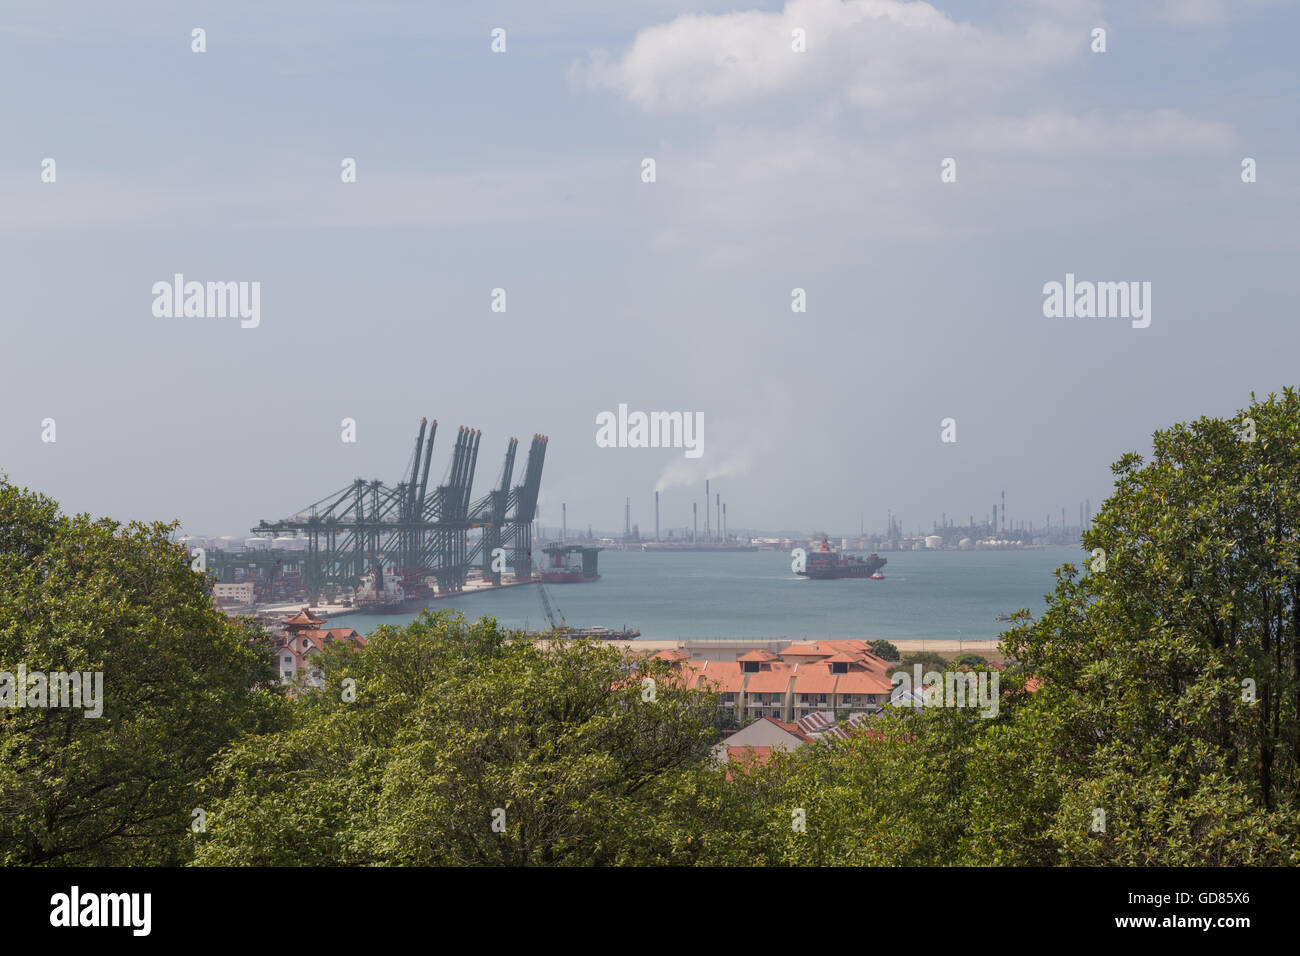 Singapore, Singapore - February 01, 2015: View of the container terminal from the Southern Ridges Stock Photo